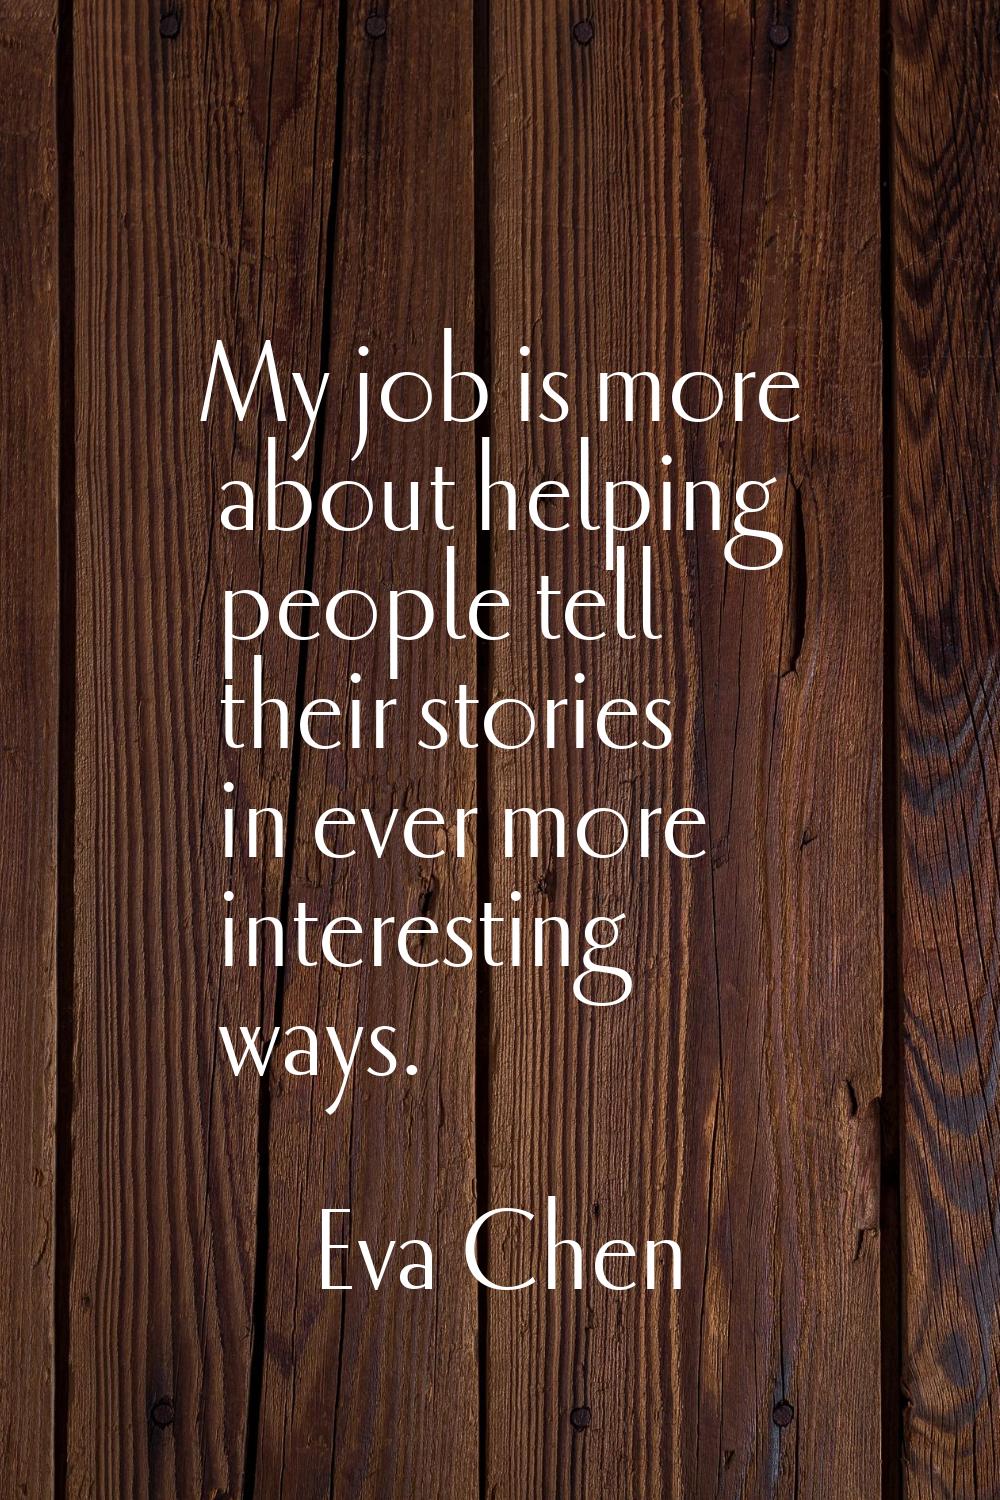 My job is more about helping people tell their stories in ever more interesting ways.